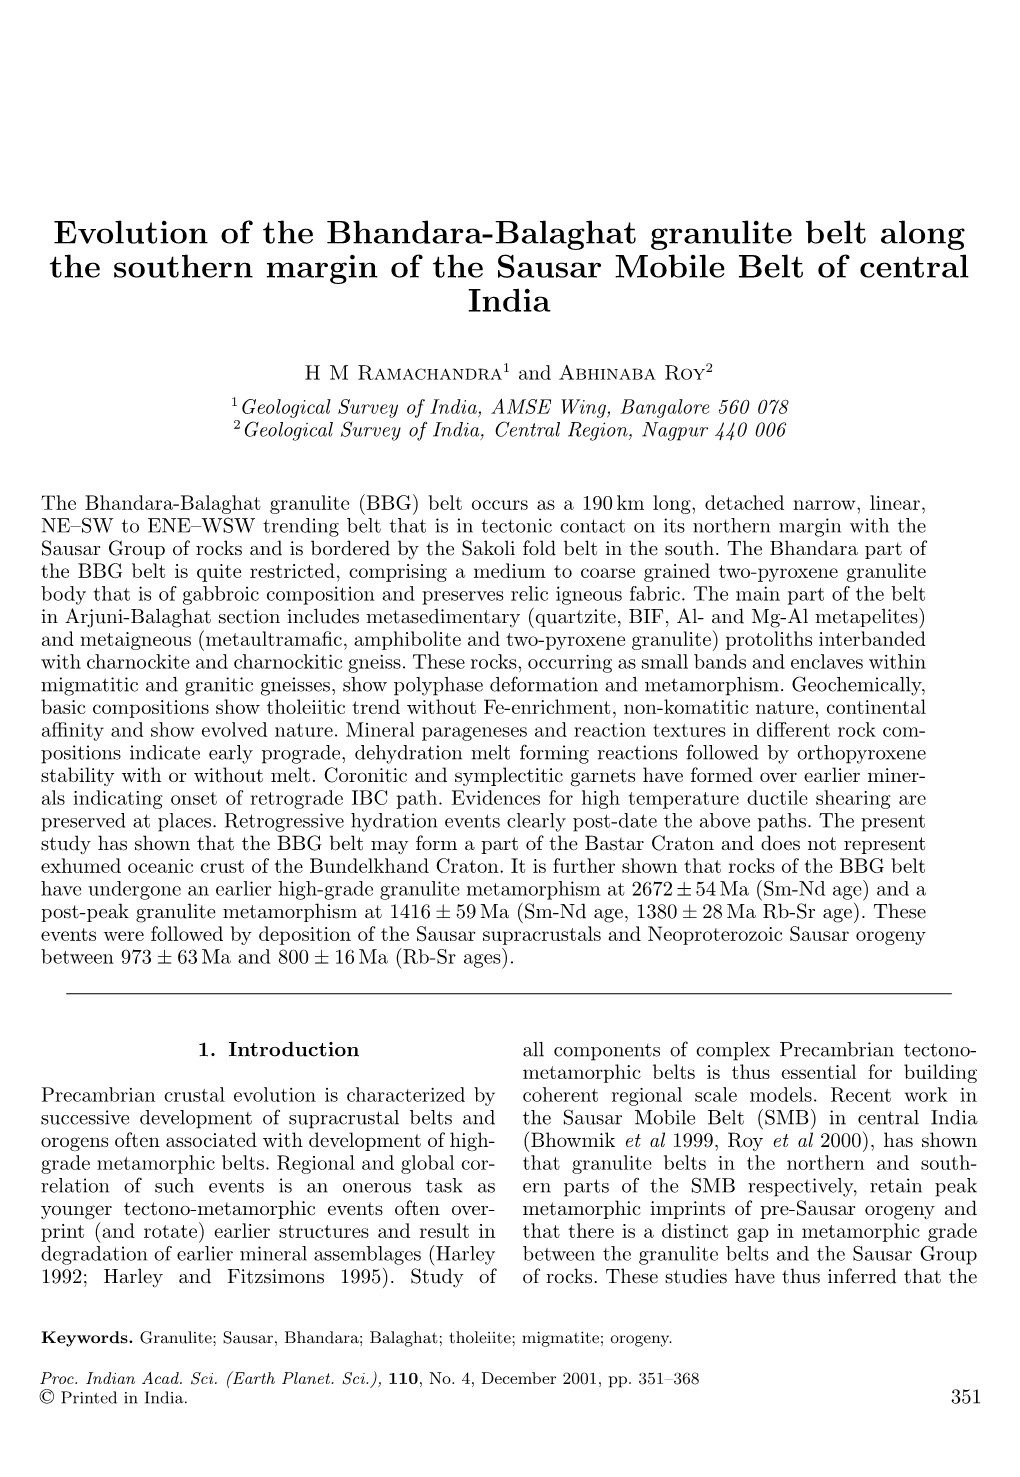 Evolution of the Bhandara-Balaghat Granulite Belt Along the Southern Margin of the Sausar Mobile Belt of Central India